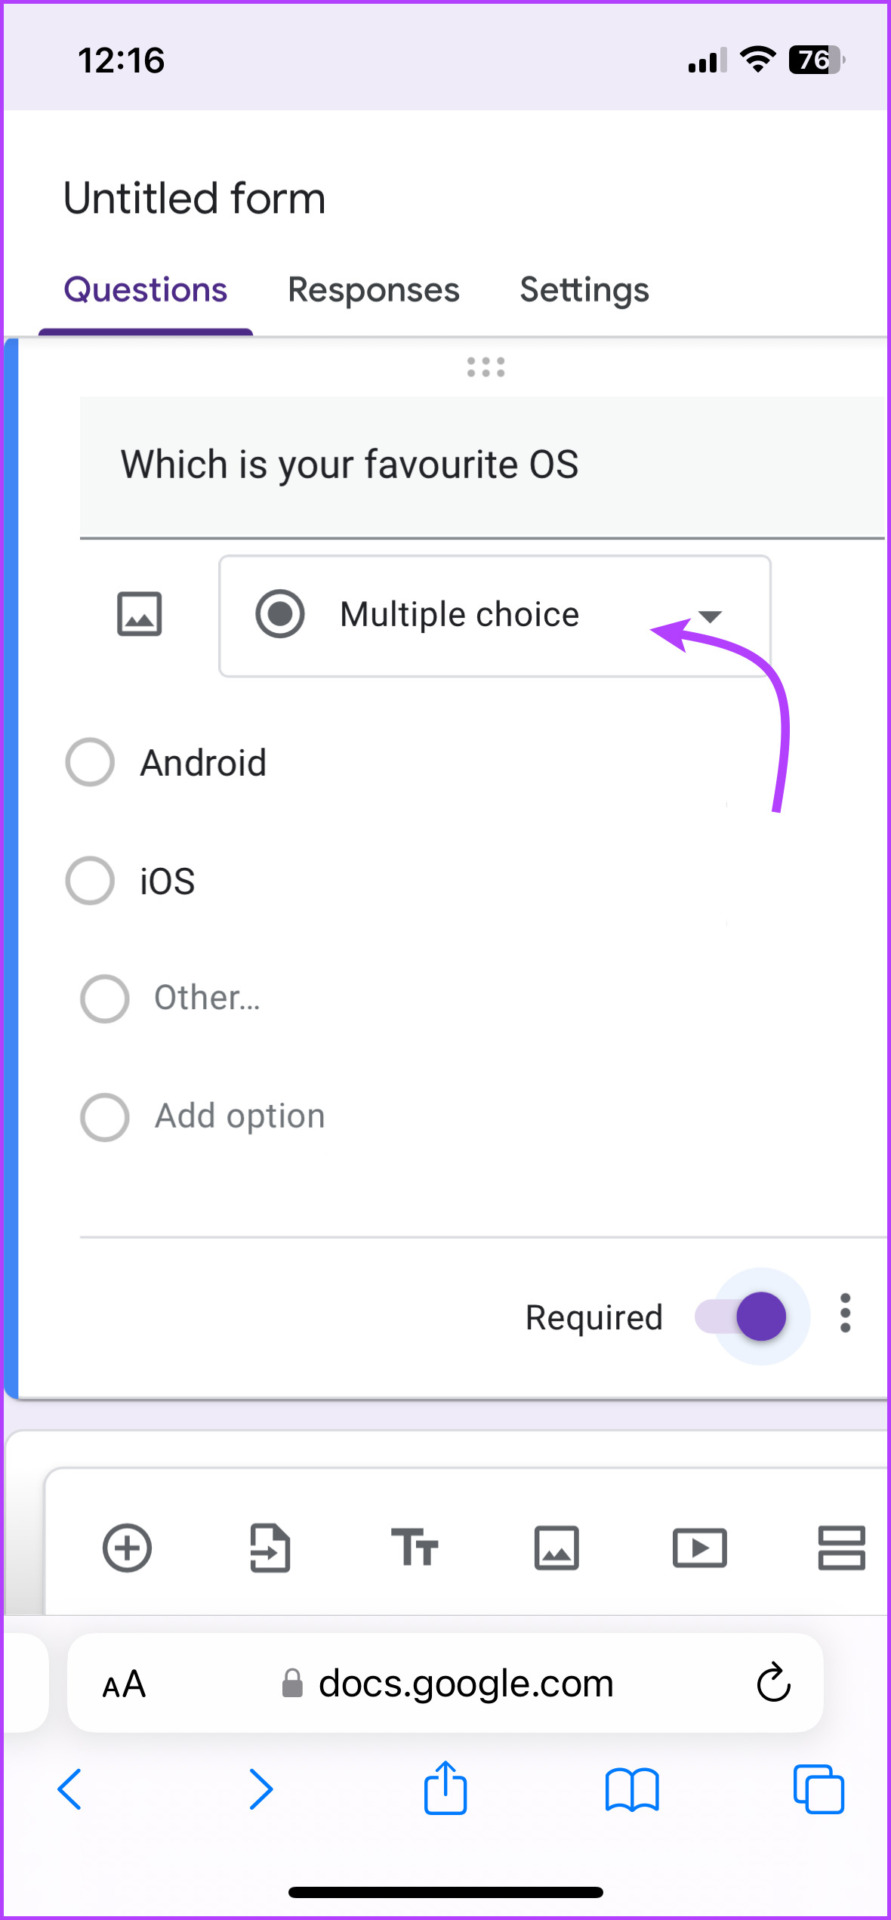 Tap the drop-down menu to select question type